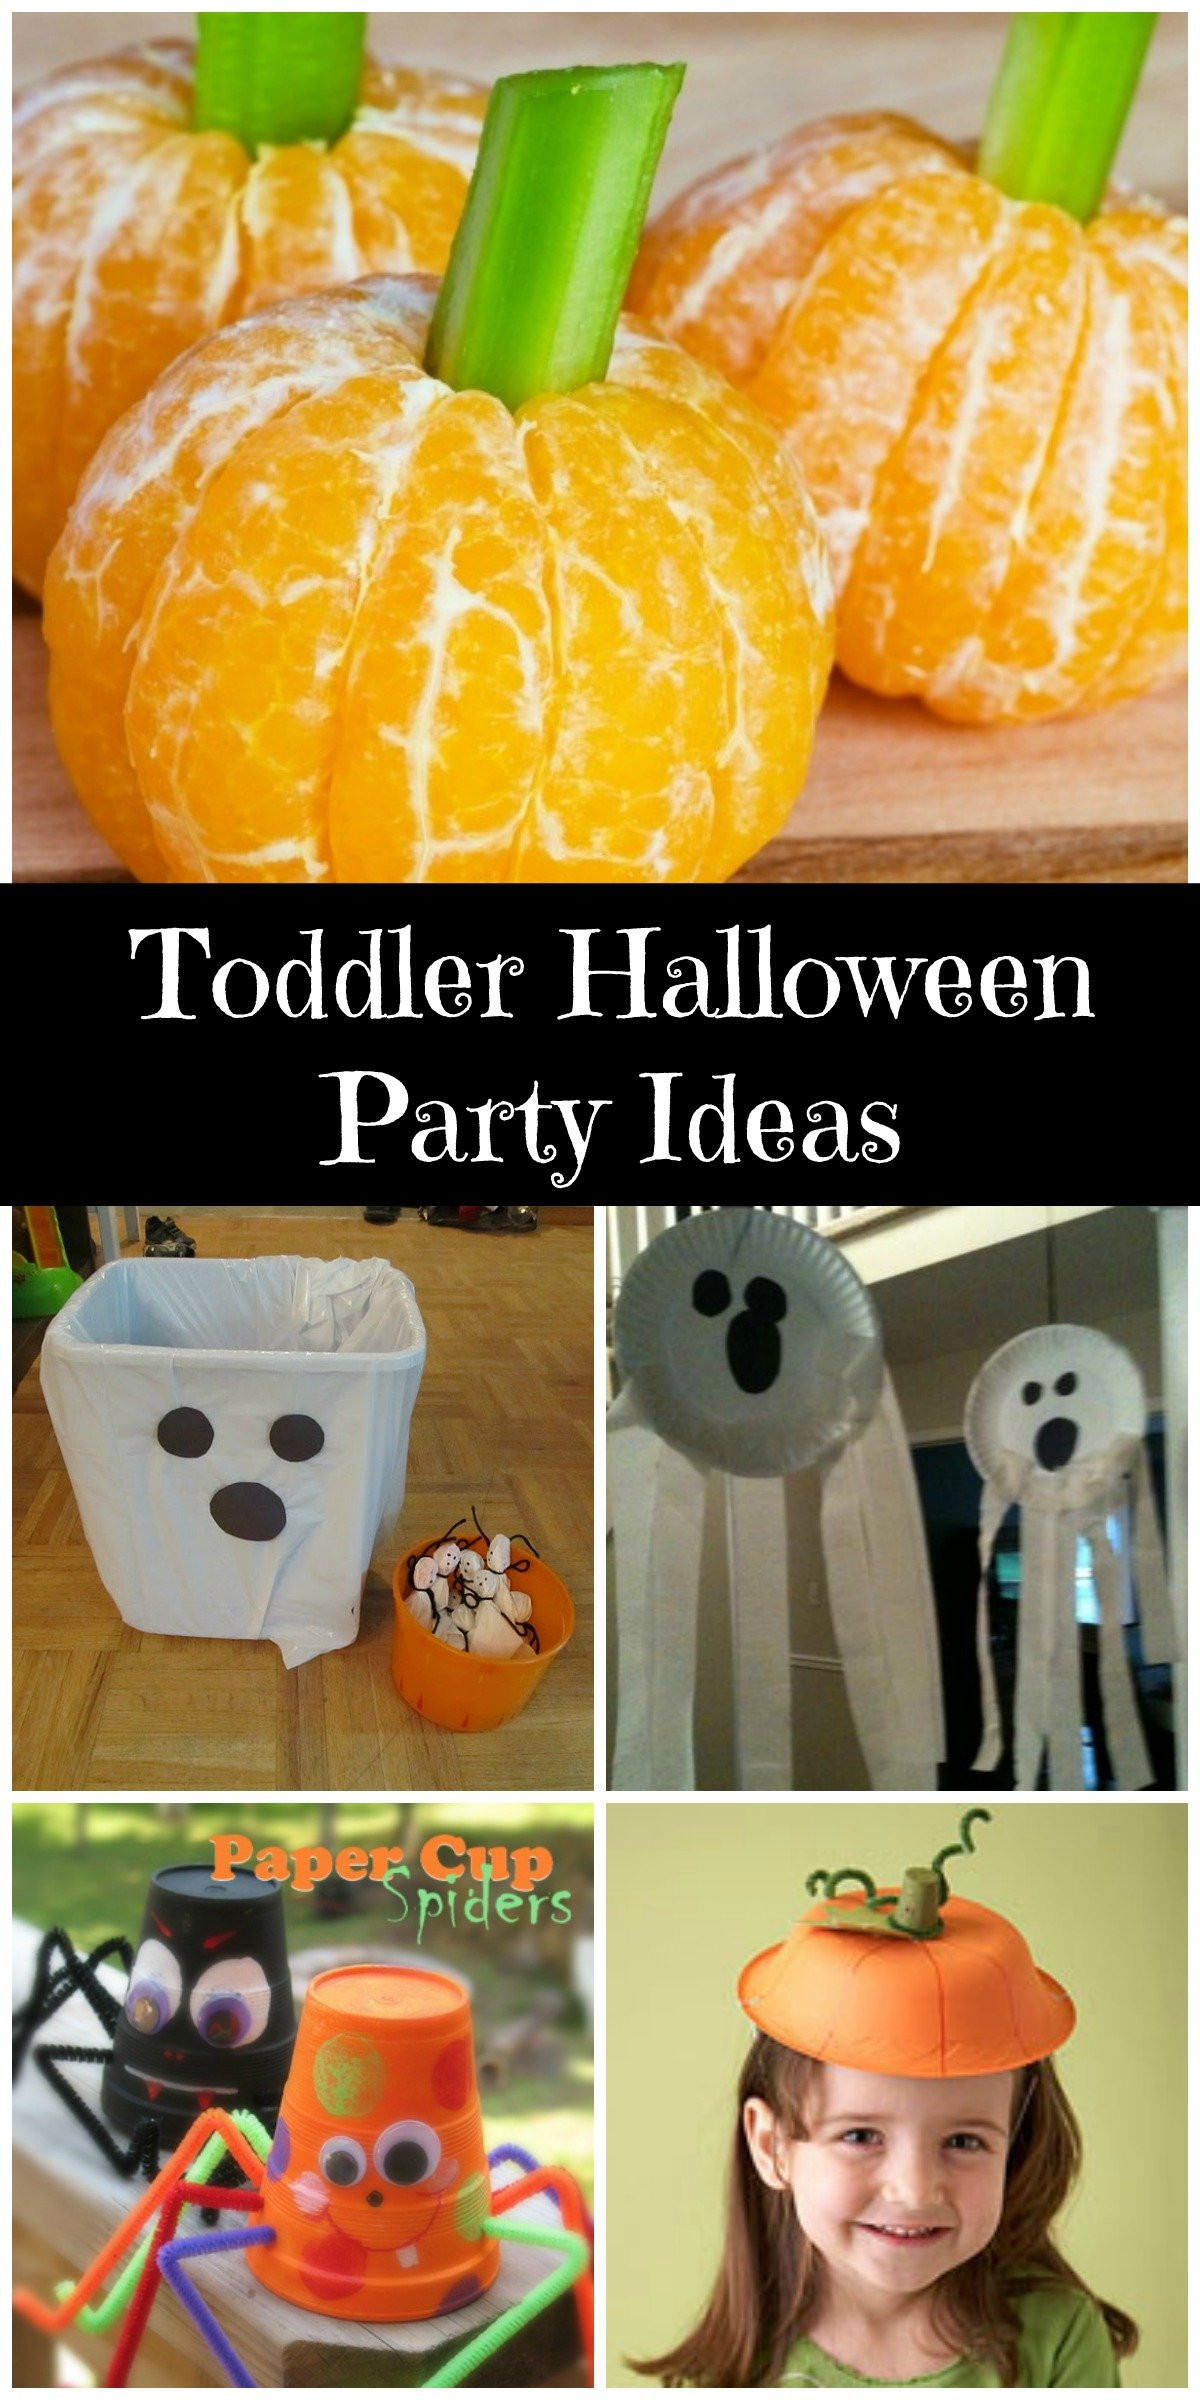 Halloween Party Ideas For Toddlers
 Toddler Halloween Party Creative Ramblings